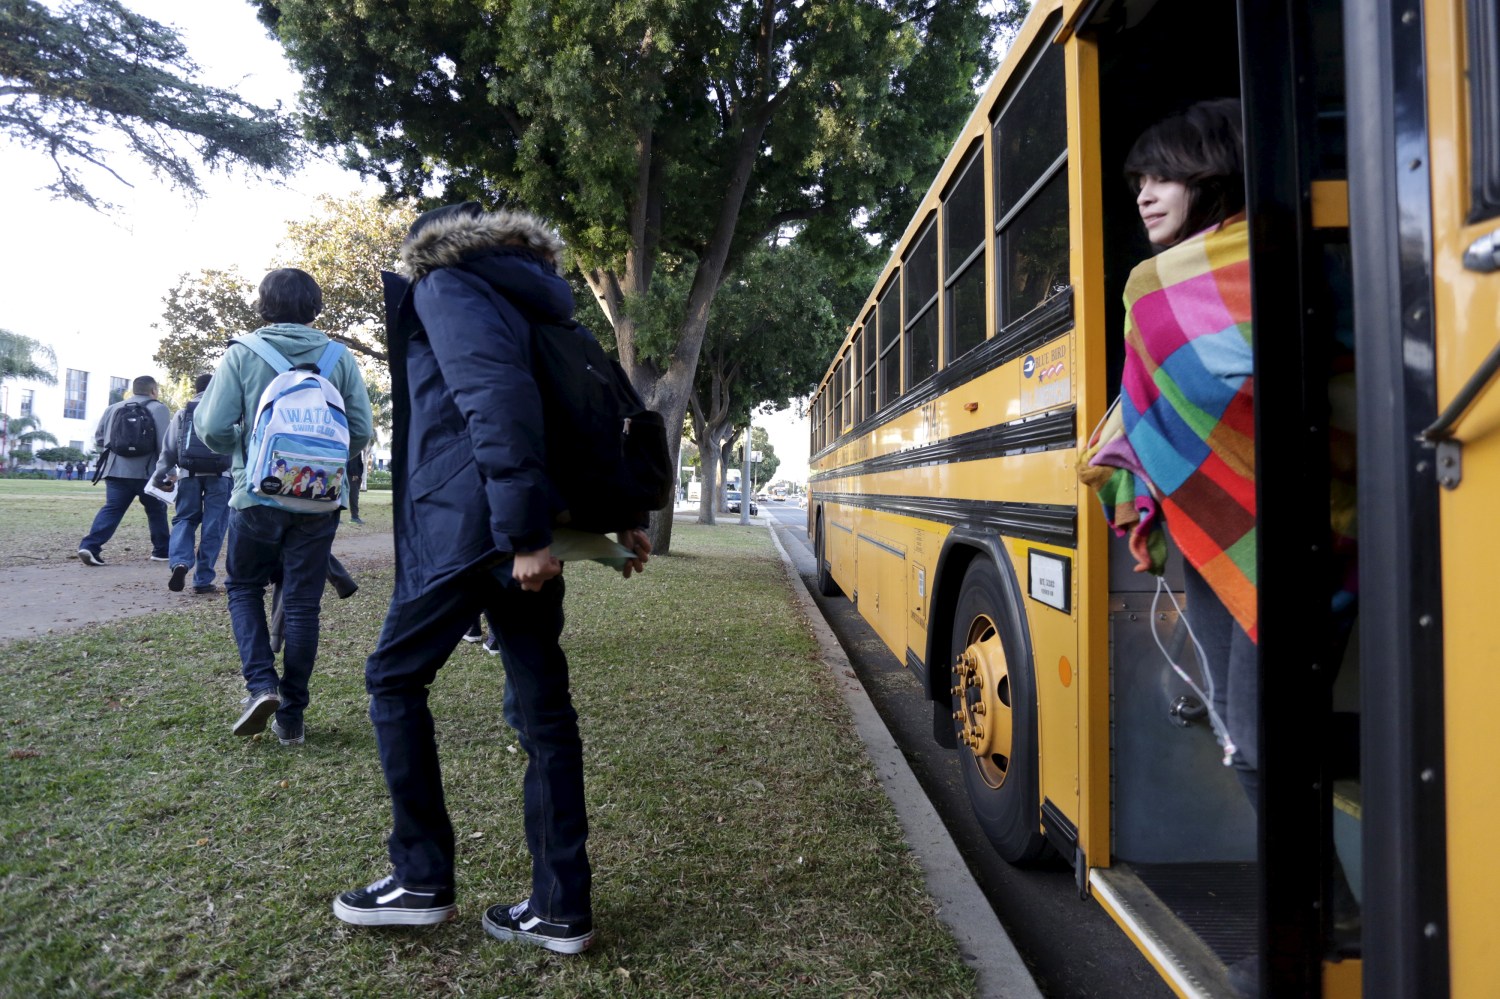 Students exit a bus as they arrive at Venice High School in Los Angeles, California